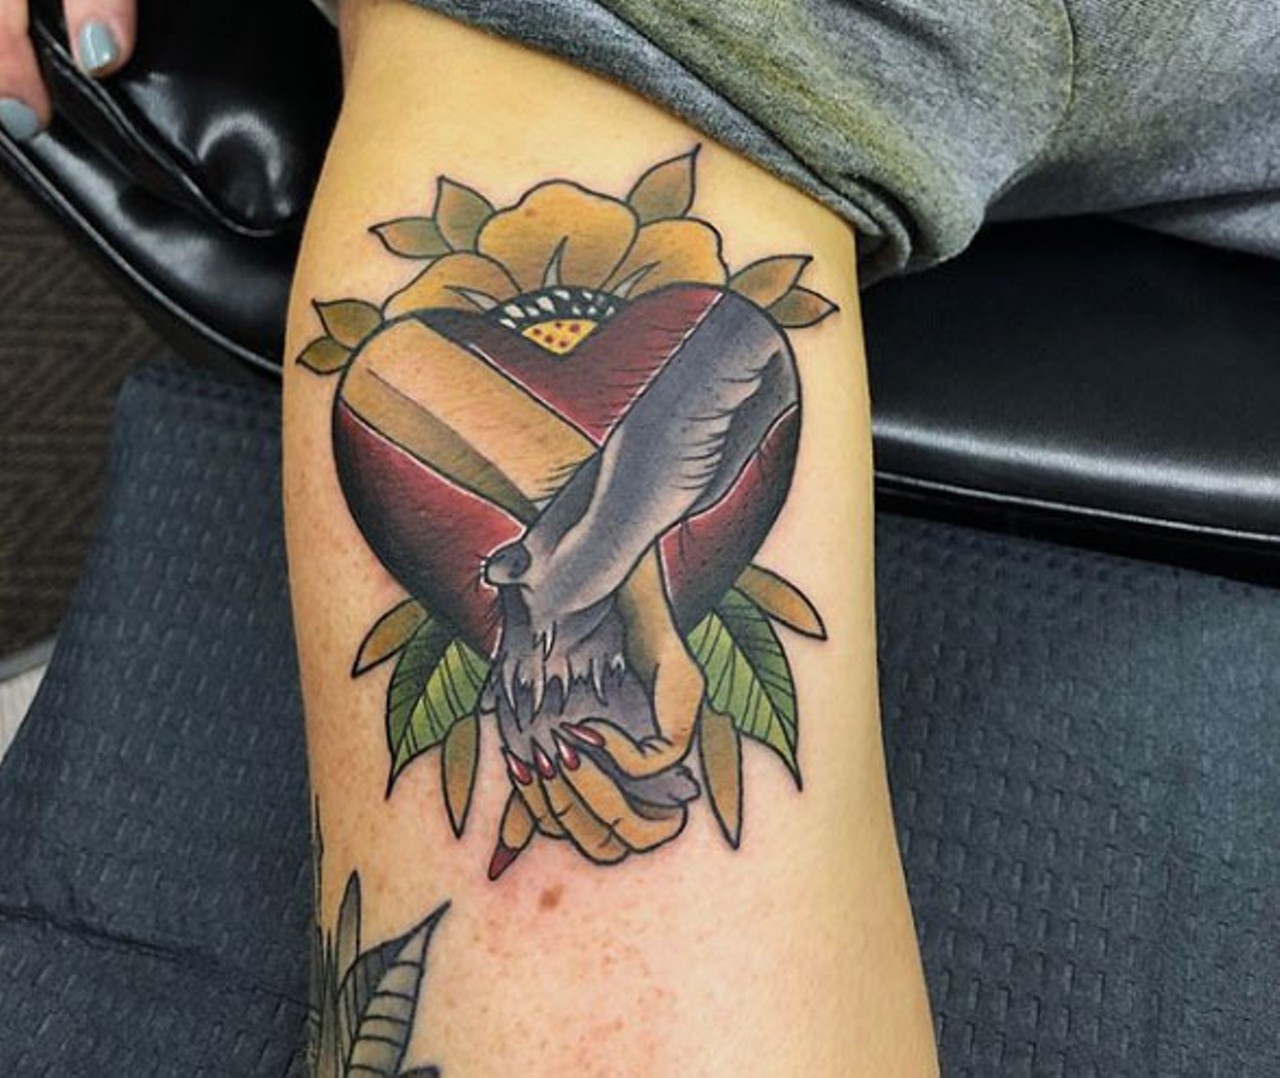 American Ultra Tattoo
11083 Prospect Rd., Strongsville, 440-268-6844
Offering more than just its diverse tattoos, American Ultra Tattoo also gives high quality piercings. 
Photo via americanultratattoo/Instagram